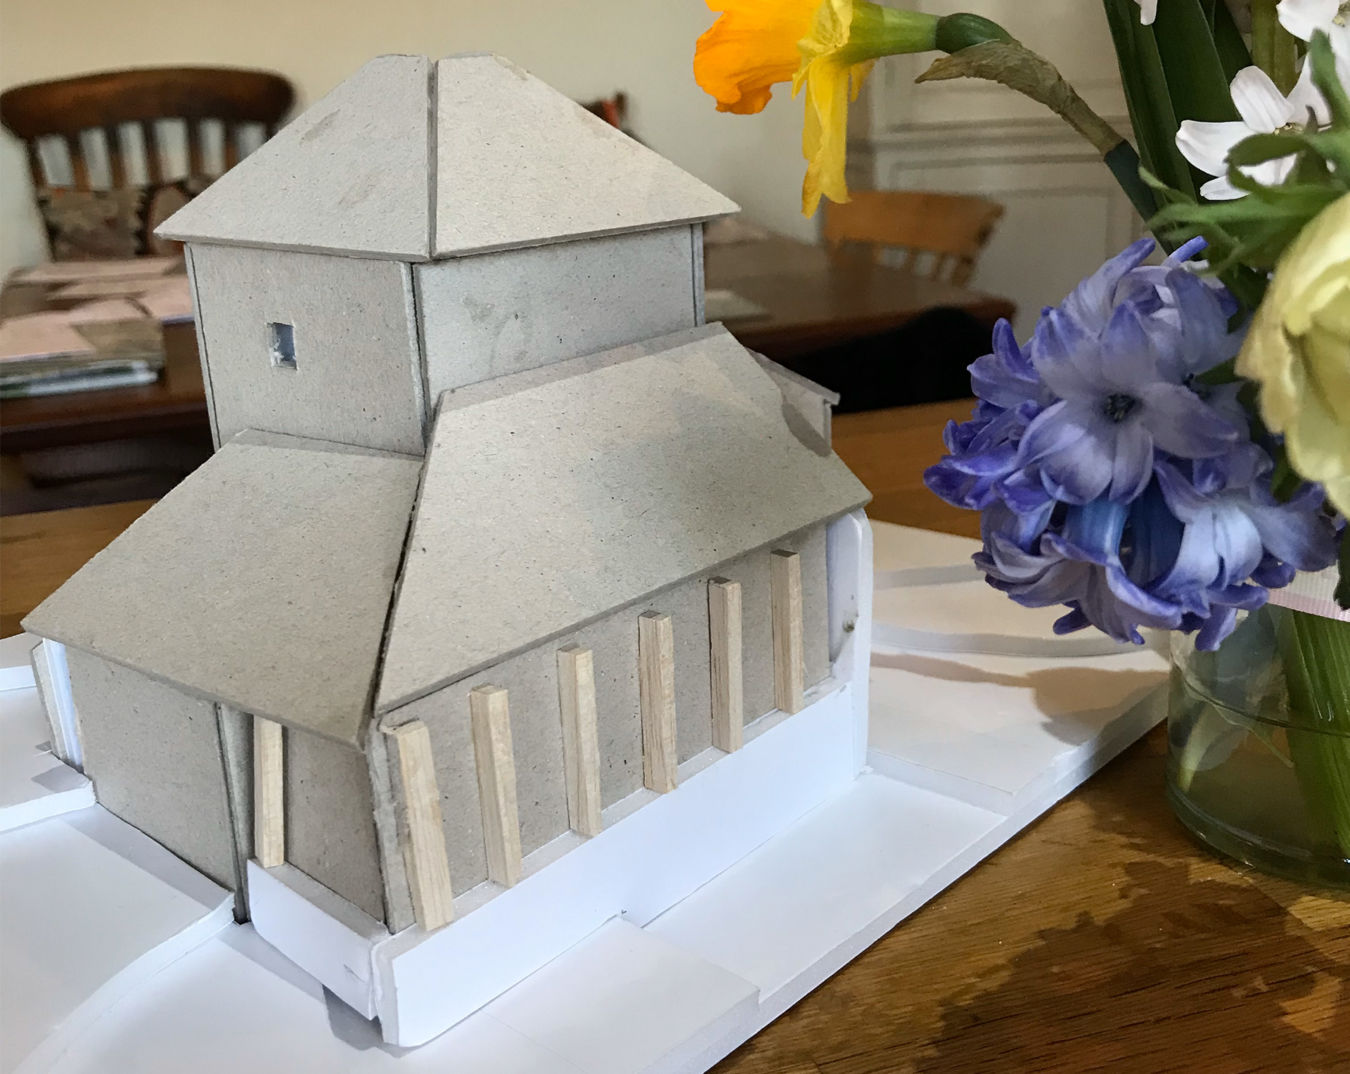 The first cardboard architect models of the Dovecot